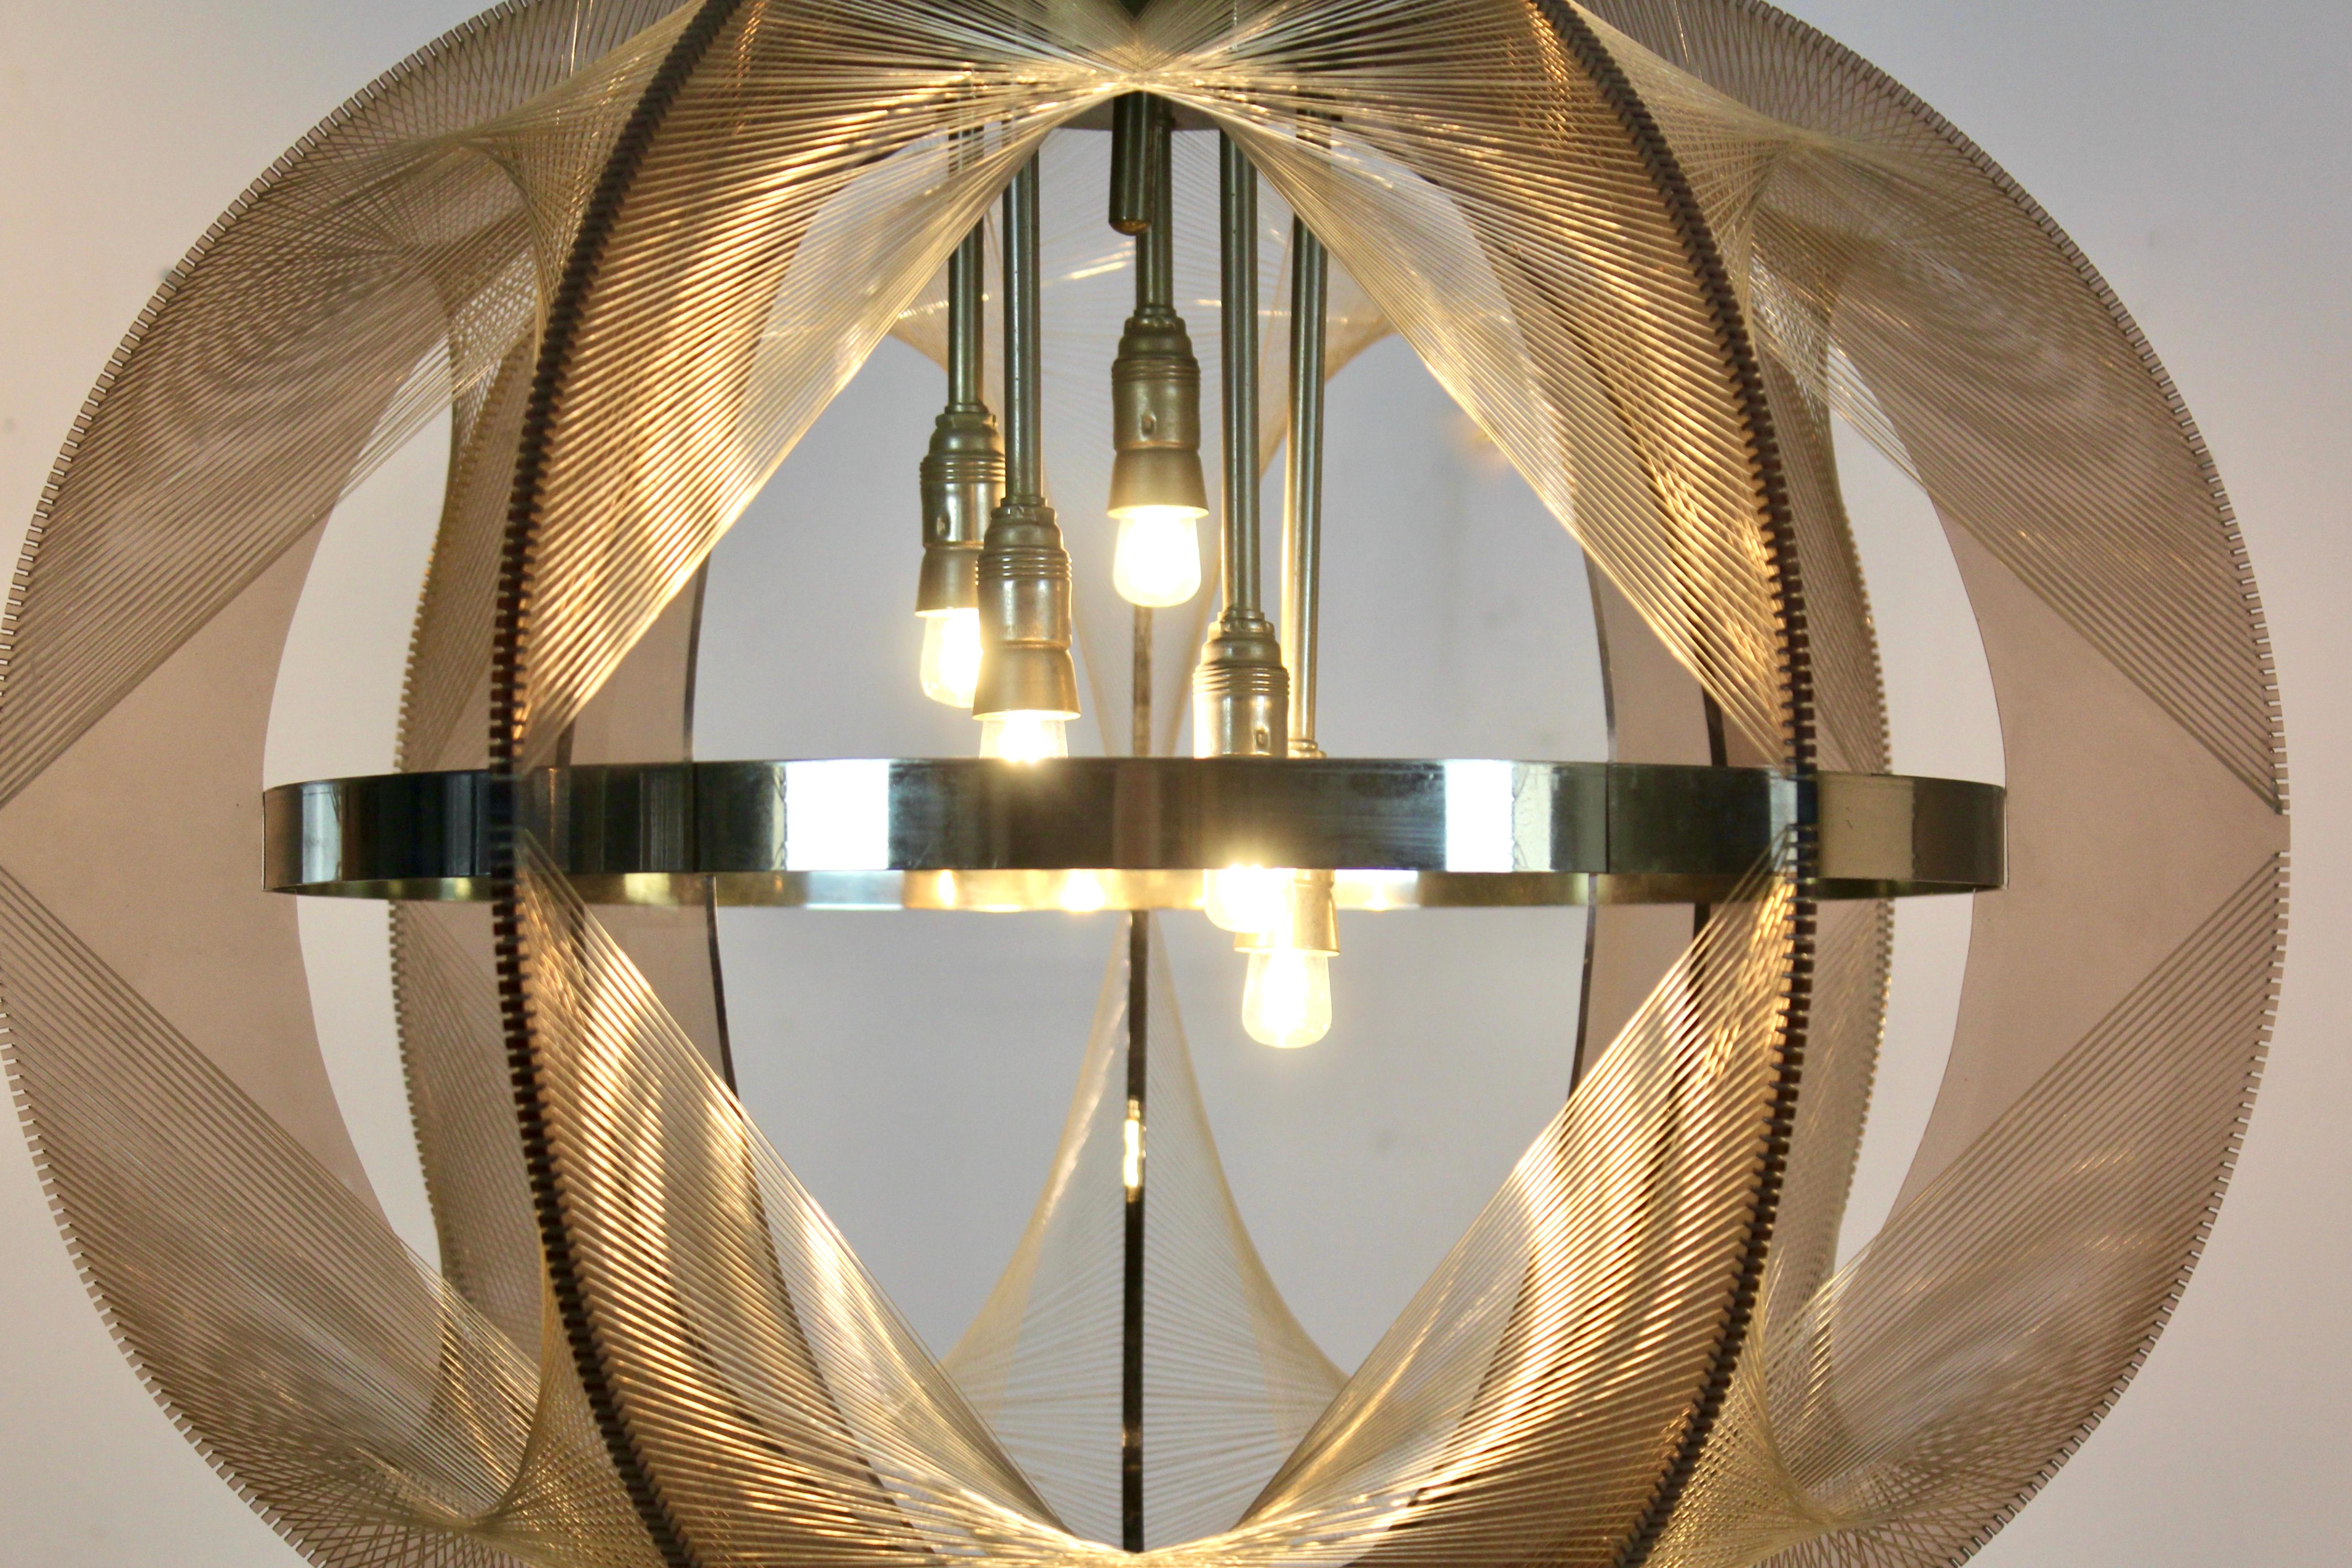 Sophisticated X-large clear wire pendant lamp designed by Paul Secon for Sompex, 1970s. This beauty is made of clear Lucite with woven nylon strings surrounding five lightbulbs. Very unique in this size. The lamp measures 55cm height, with the wire